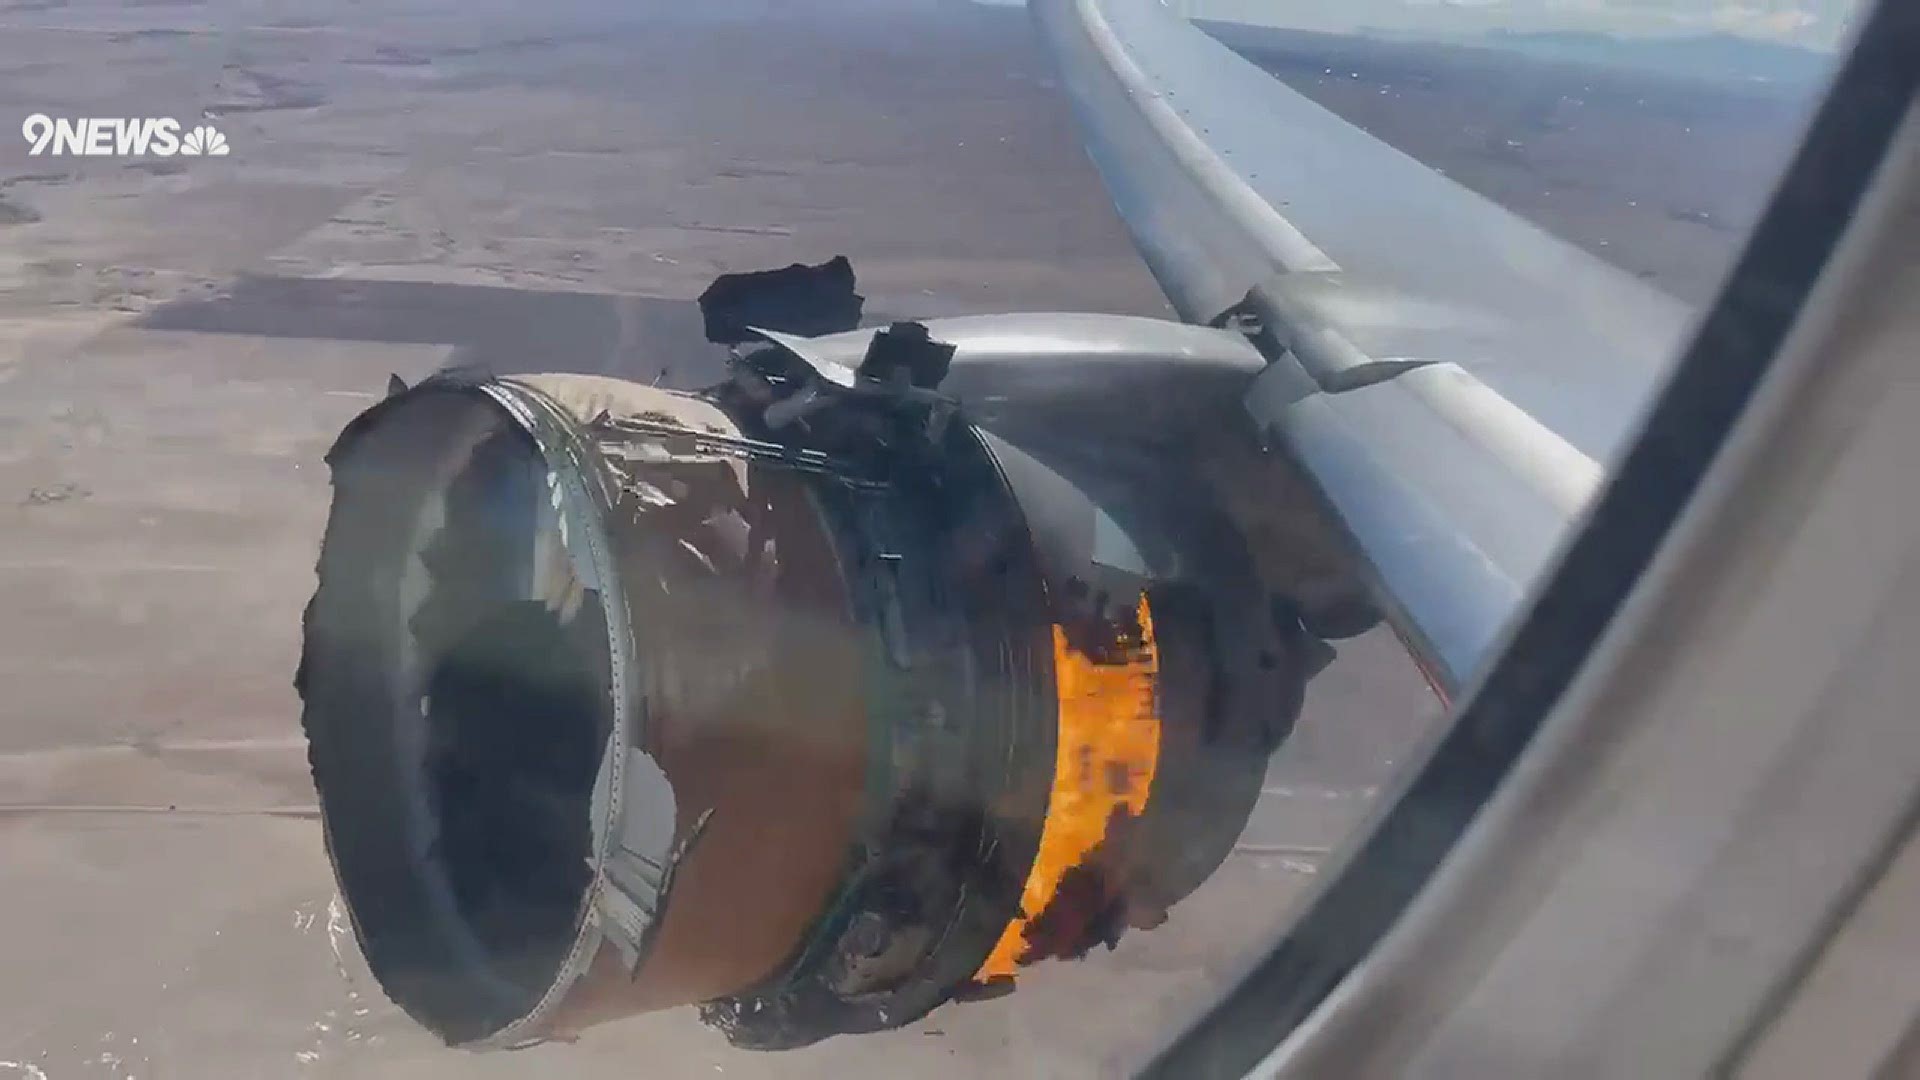 According to the Federal Aviation Administration (FAA), the Boeing 777-200's right engine failed shortly after takeoff.